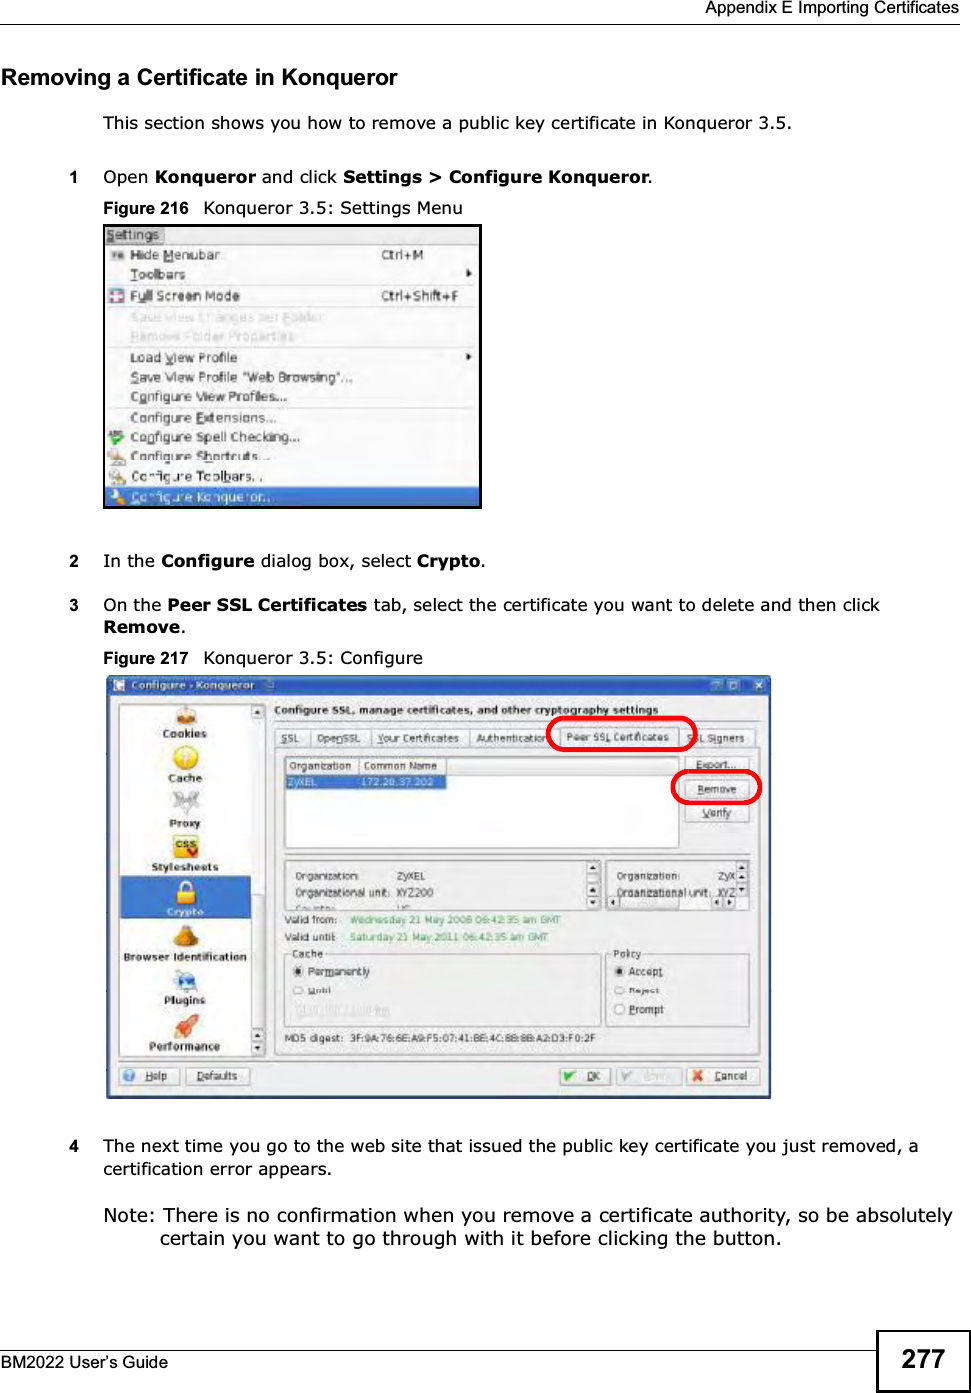  Appendix E Importing CertificatesBM2022 Users Guide 277Removing a Certificate in KonquerorThis section shows you how to remove a public key certificate in Konqueror 3.5.1Open Konqueror and click Settings &gt; Configure Konqueror.Figure 216   Konqueror 3.5: Settings Menu2In the Configure dialog box, select Crypto. 3On the Peer SSL Certificates tab, select the certificate you want to delete and then click  Remove.Figure 217   Konqueror 3.5: Configure4The next time you go to the web site that issued the public key certificate you just removed, a certification error appears.Note: There is no confirmation when you remove a certificate authority, so be absolutely certain you want to go through with it before clicking the button.